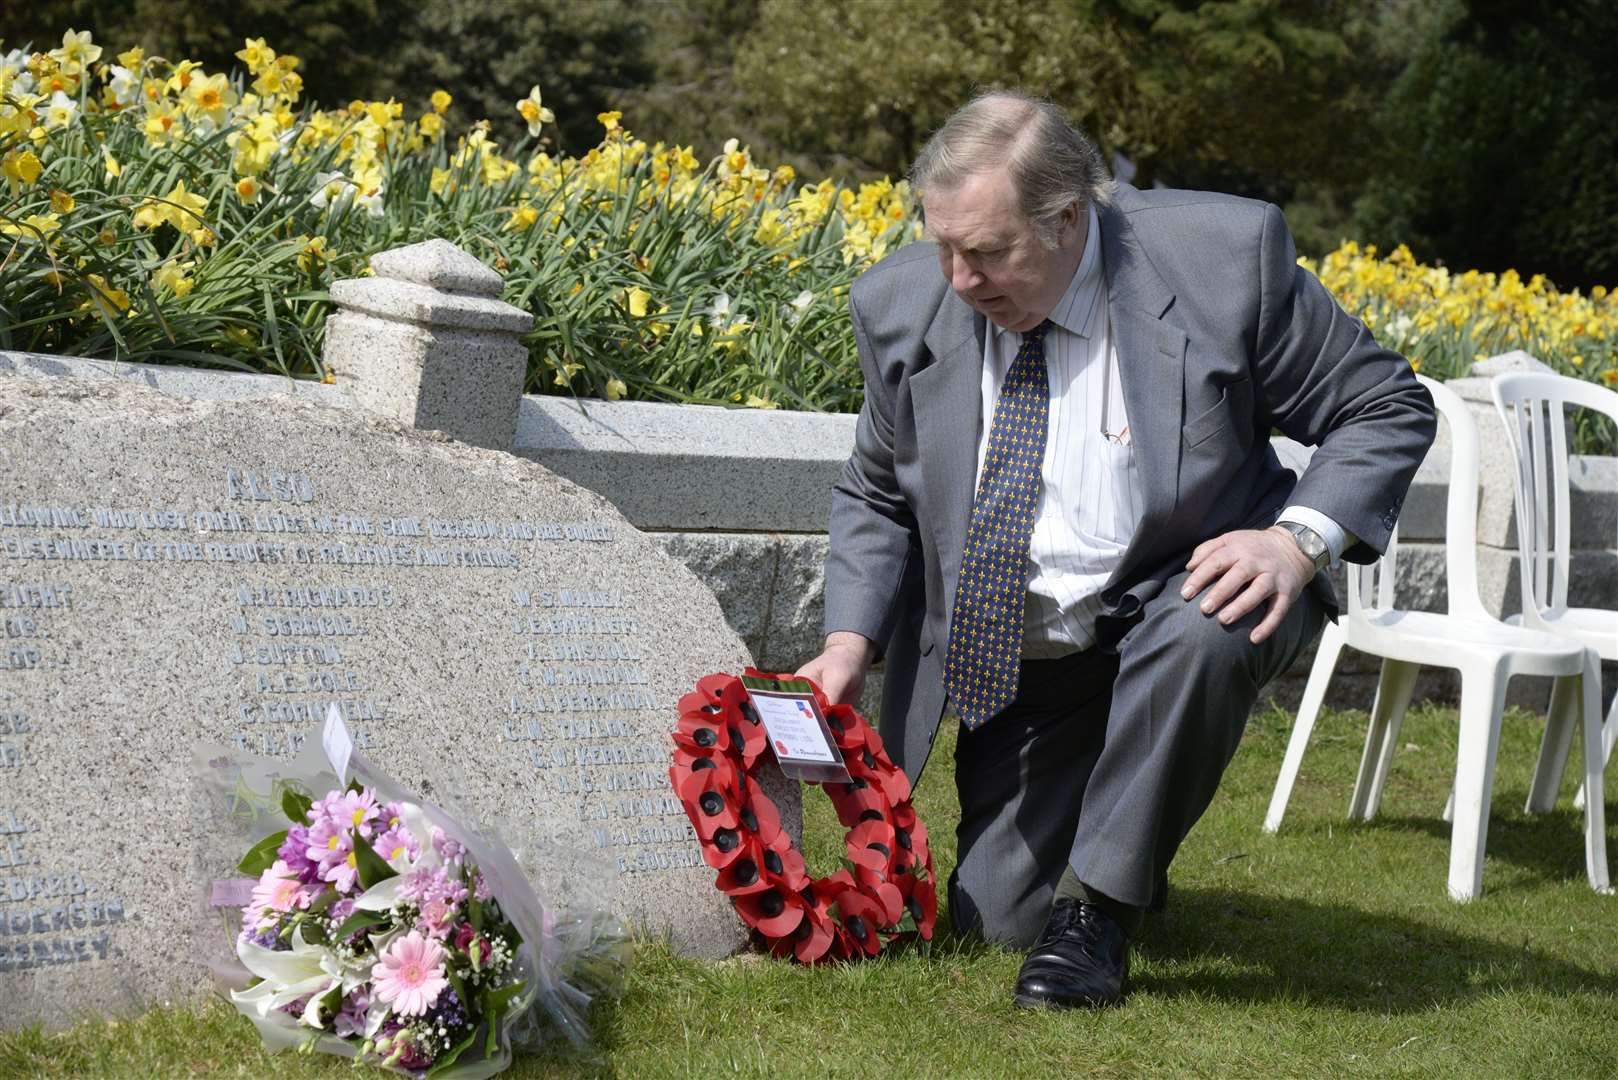 Len Budd of the Chilham Remembrance Group lays a wreath at the 100th anniversary service in memory of the three men from the village killed in the Great Explosion